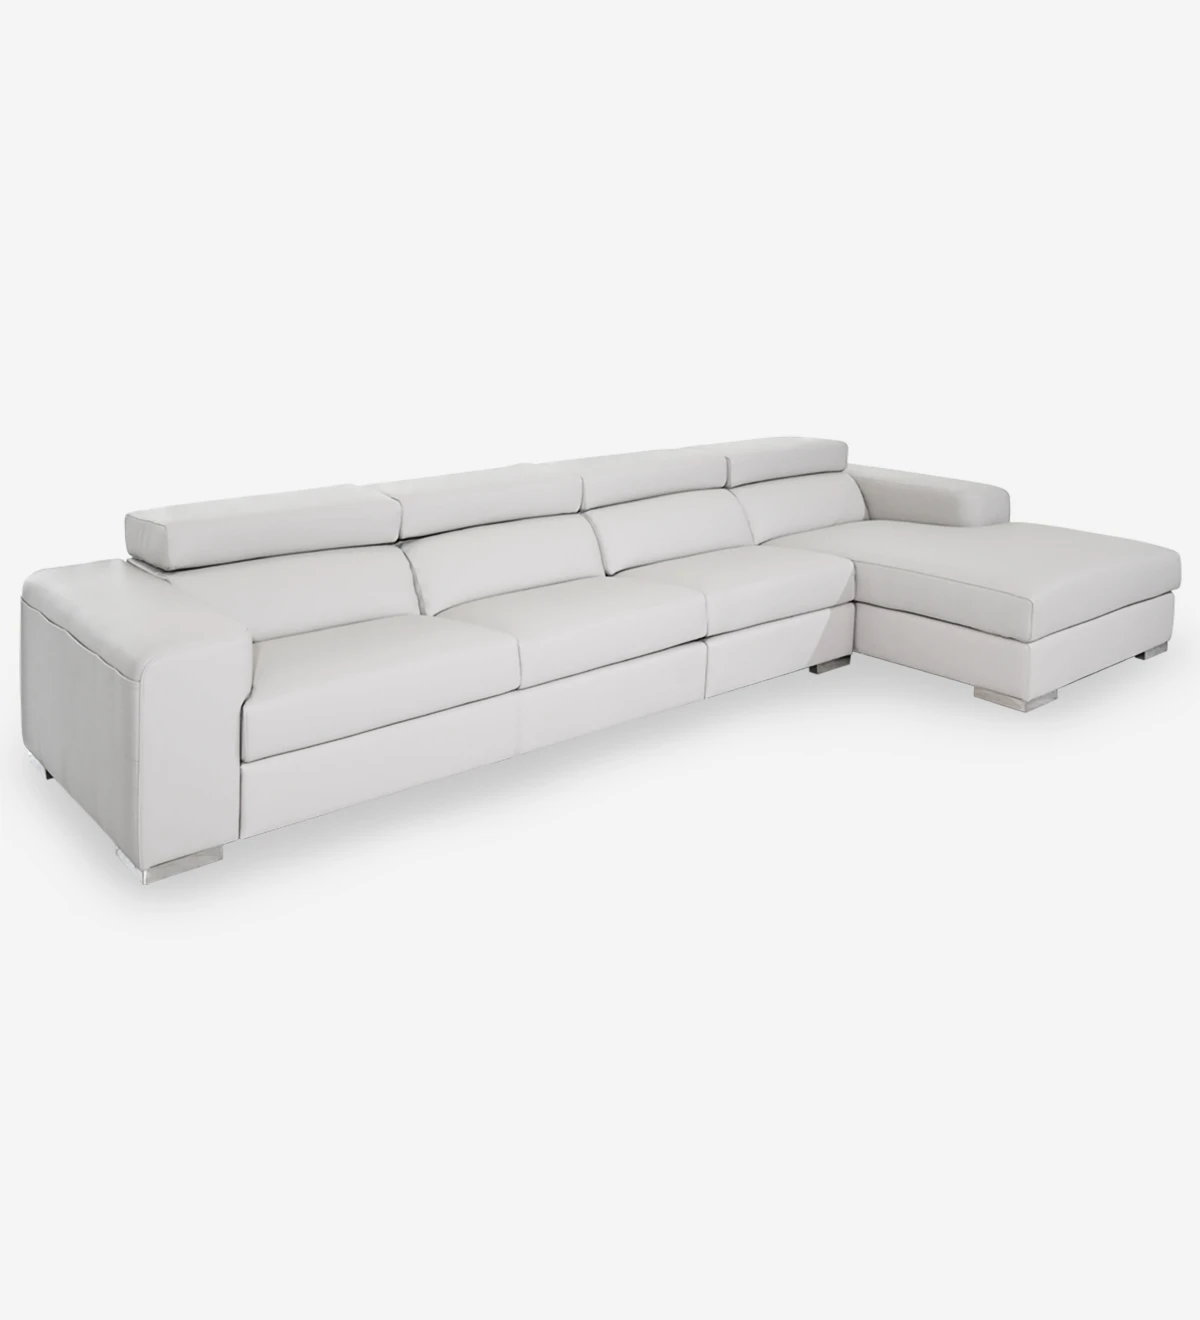 3 seater sofa with chaise longue, upholstered in eco-leather light grey, with reclining headrests.